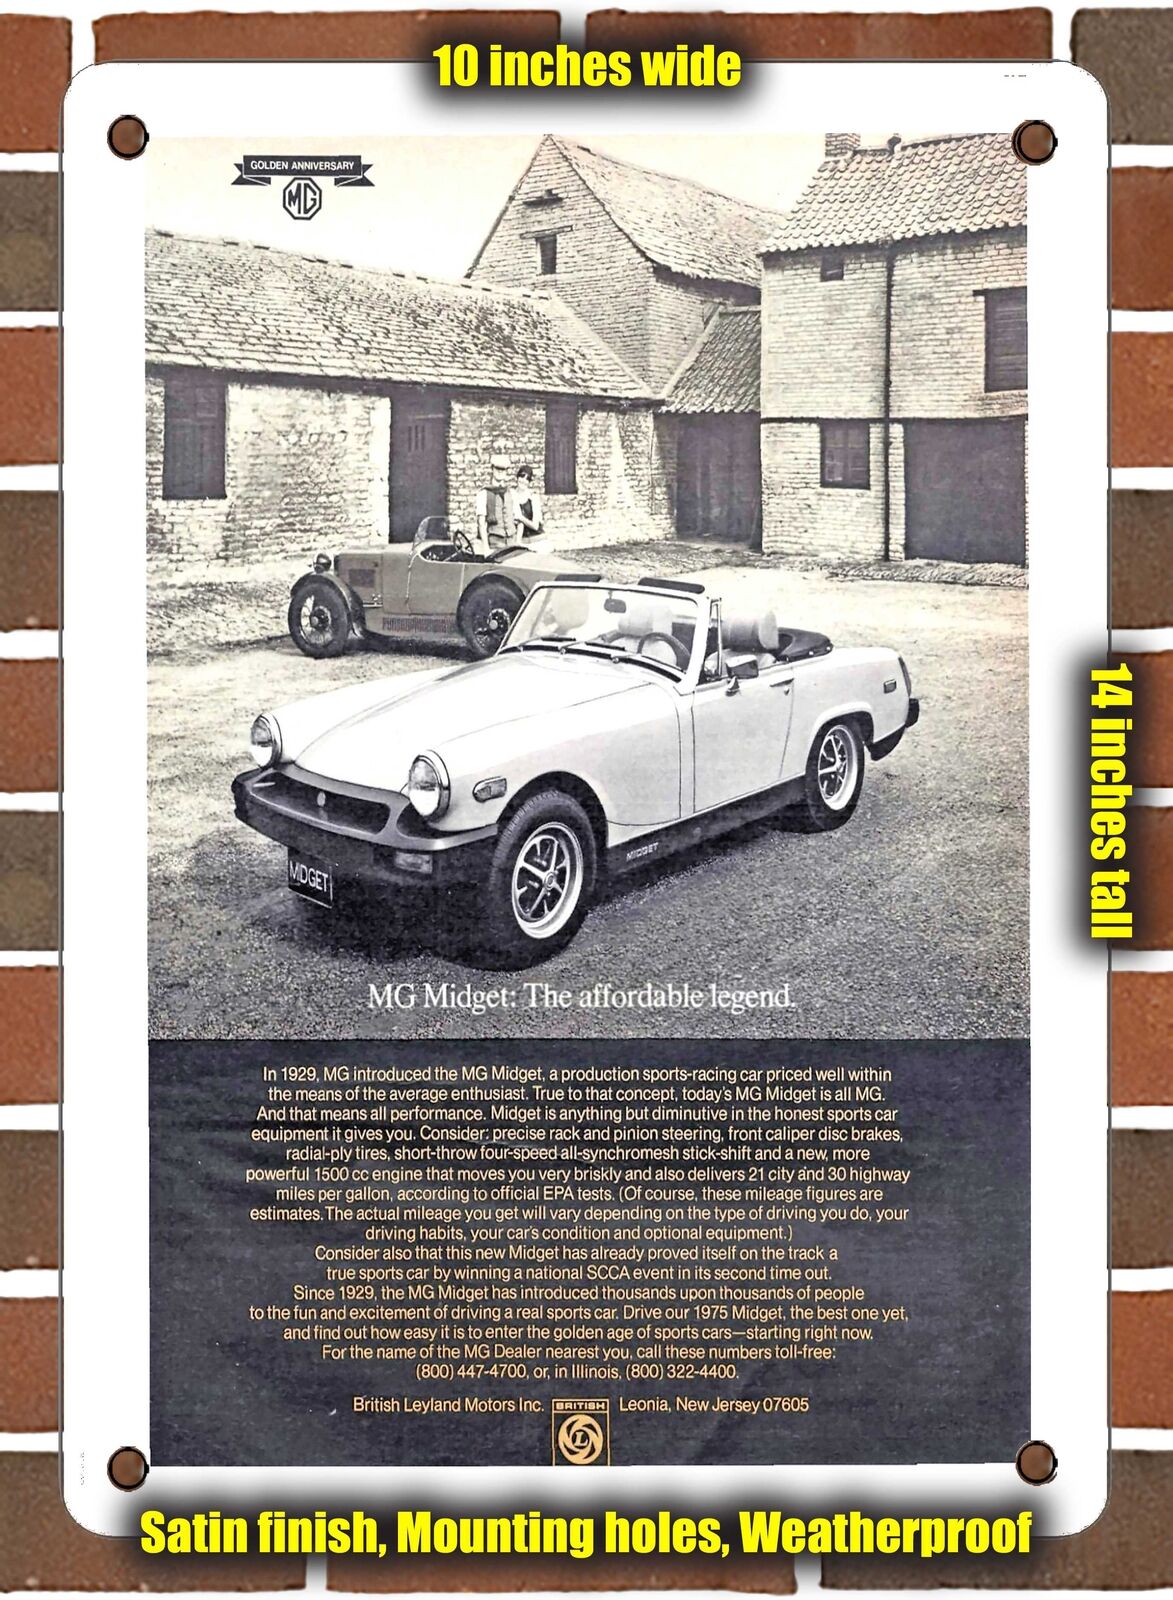 METAL SIGN - 1976 MG Midget The Affordable Legend - 10x14 Inches